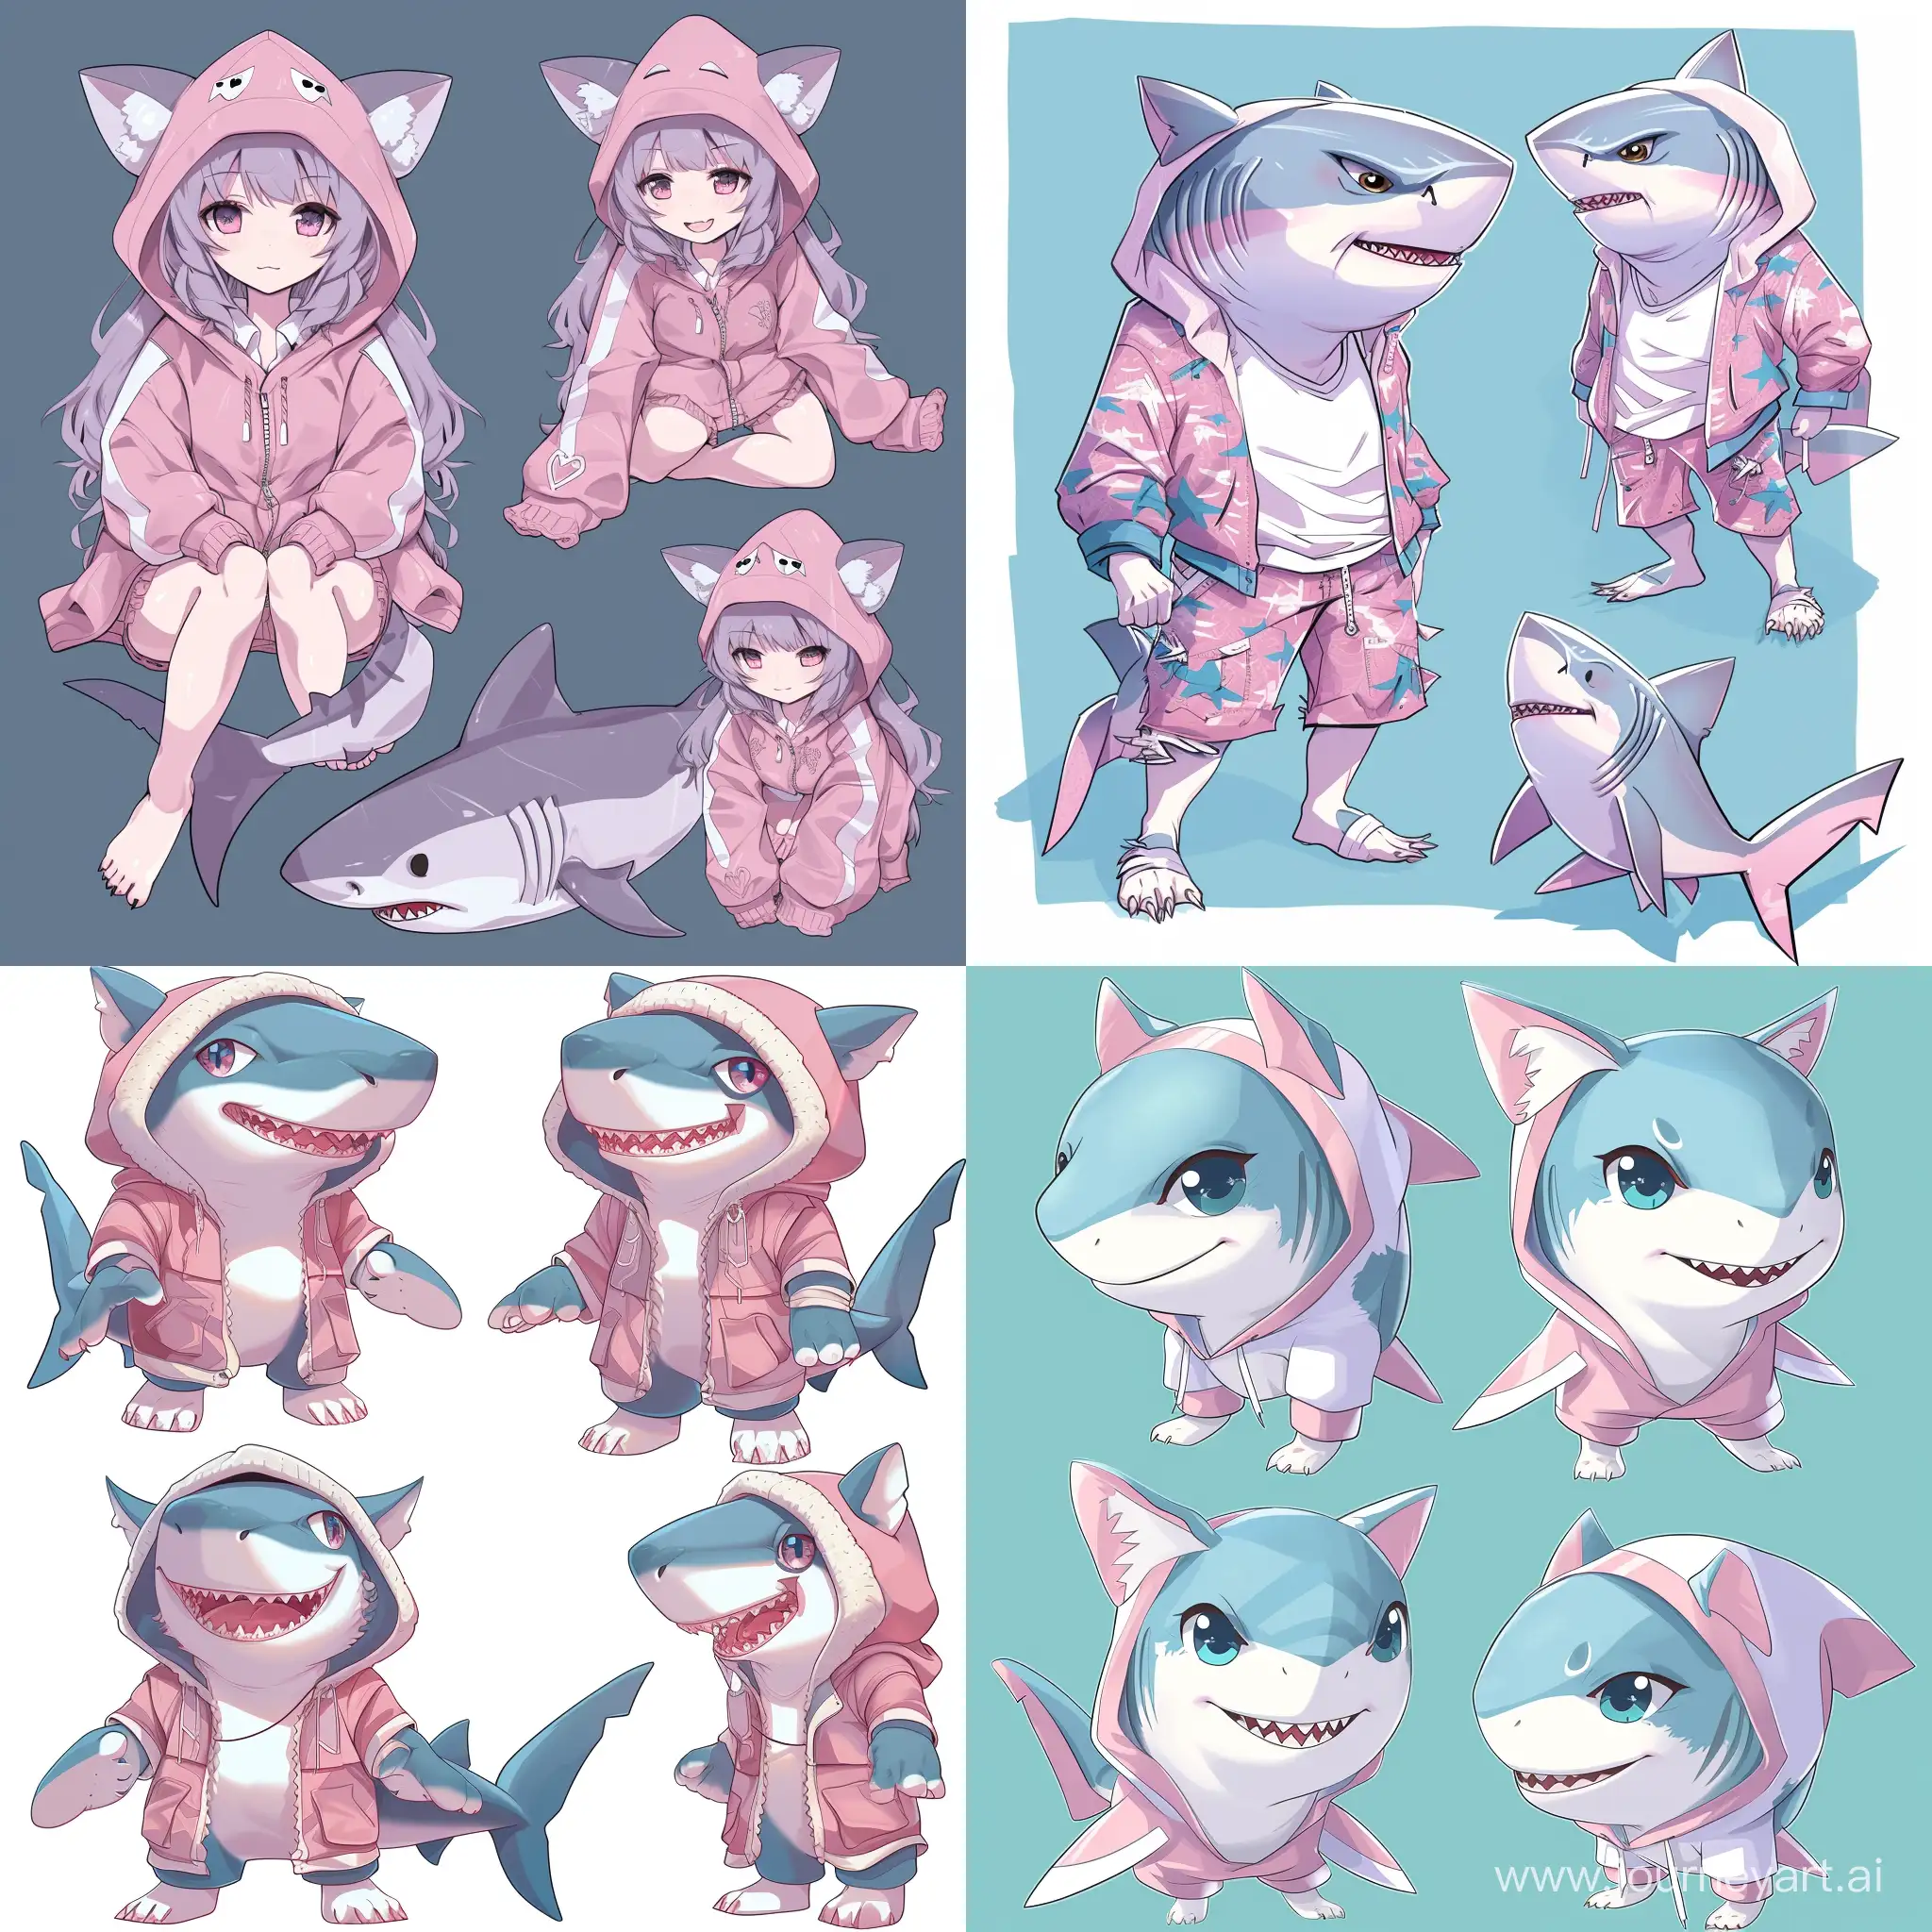 furry character, shark, anthro, cute, anime, chibi, digital art, character reference, character design, aesthetic, multiple angles, gyaru clothing